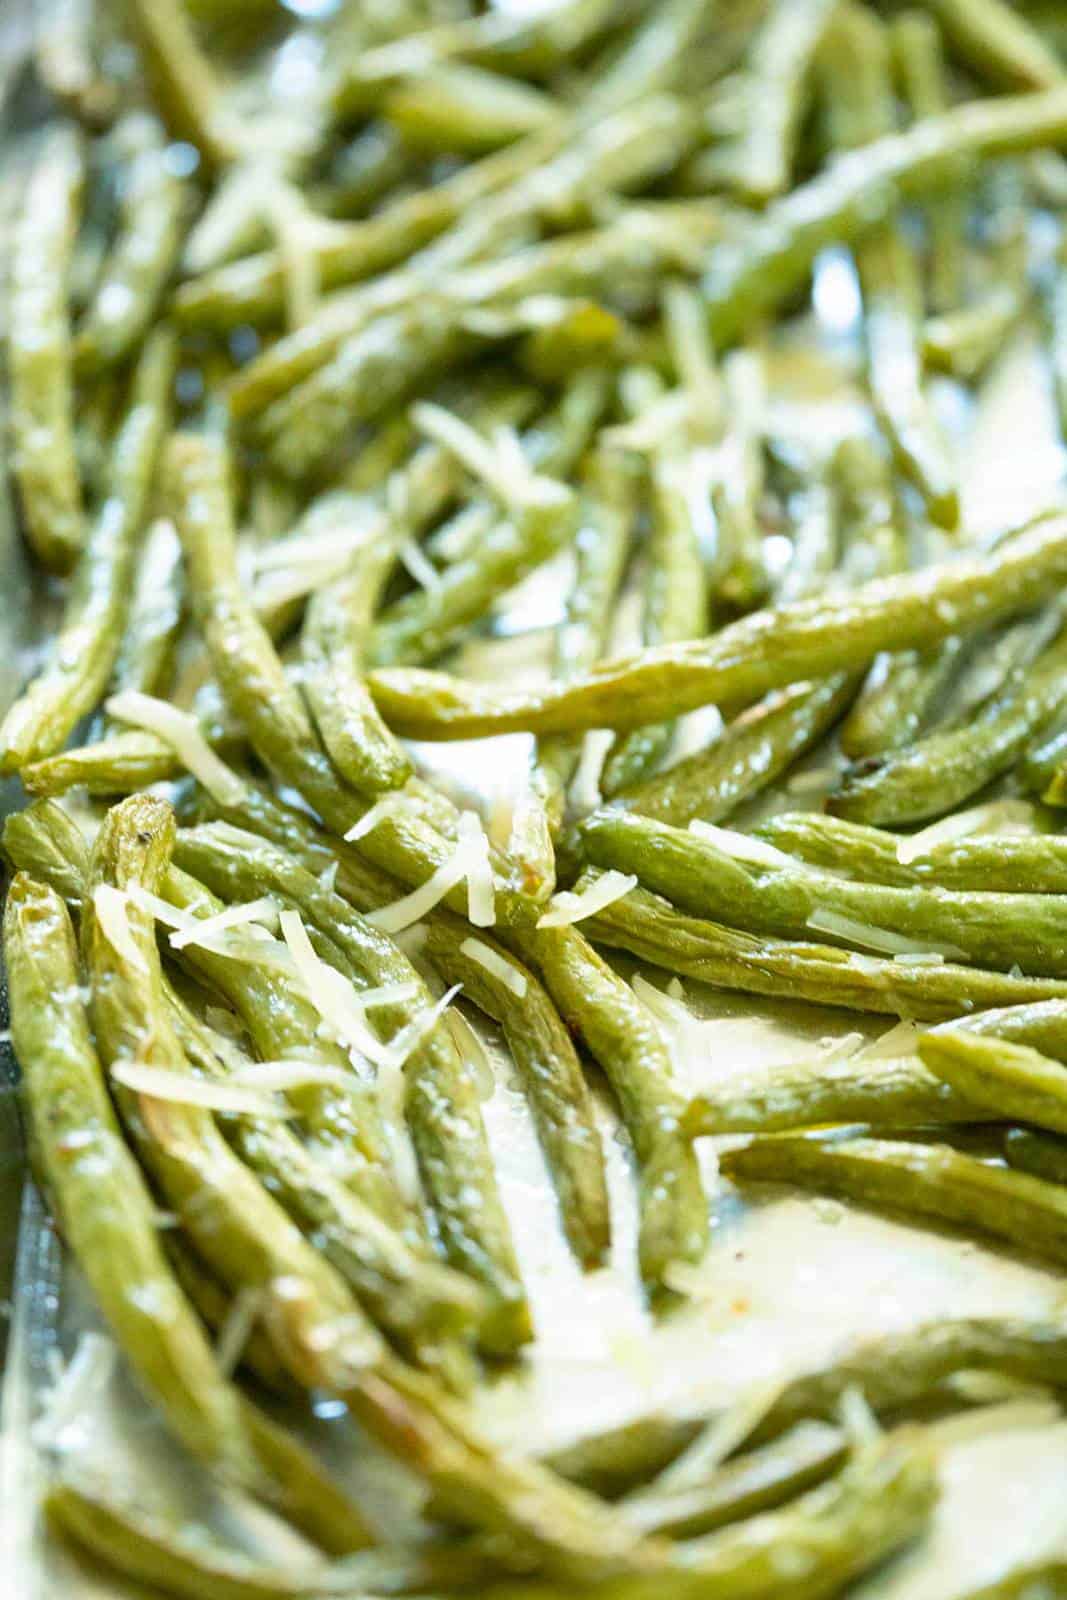 Oven Roasted Green Beans with Parmesan - Healthier Dishes